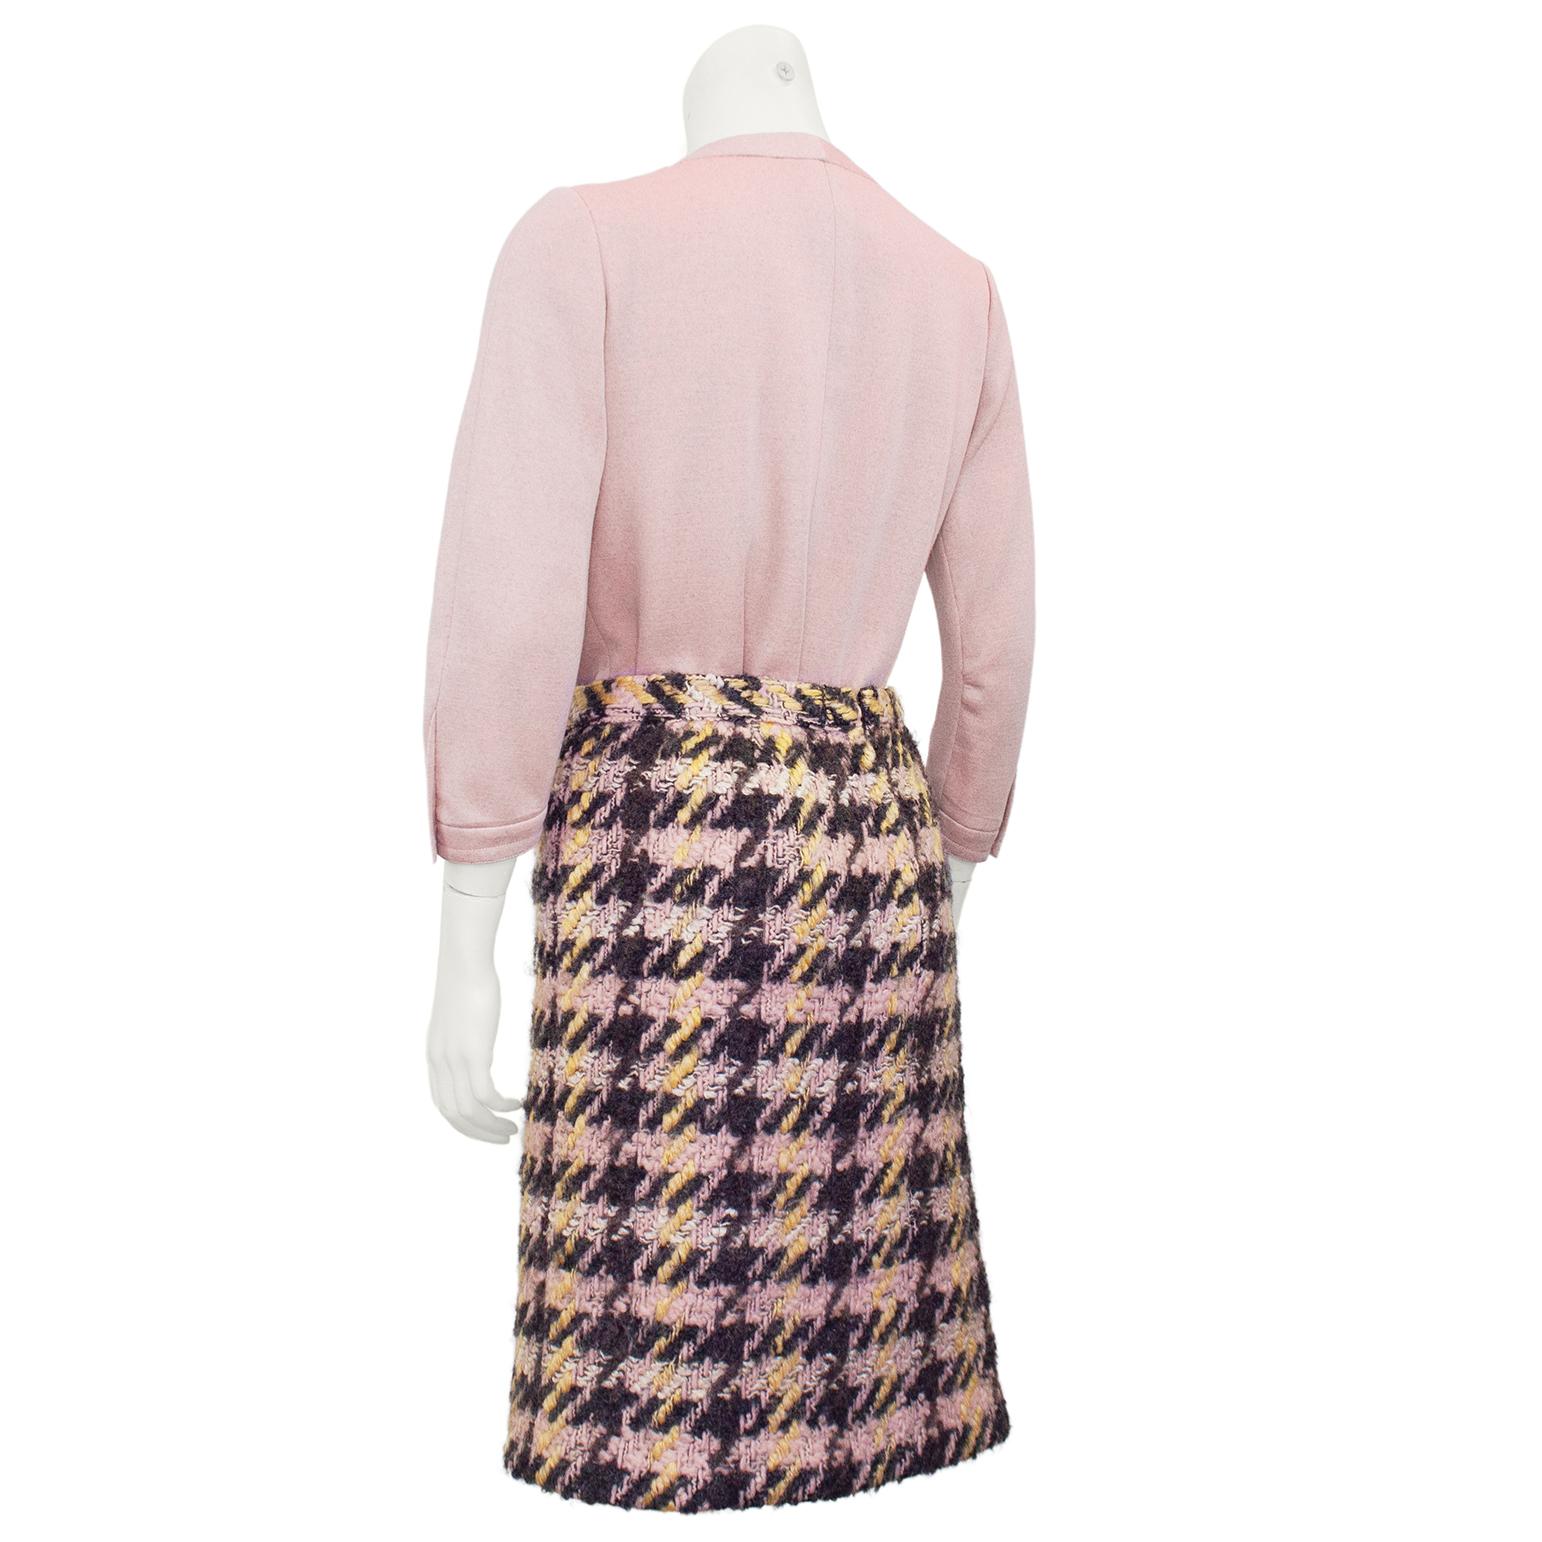 1960s Chanel Haute Couture Pink and Charcoal Grey Houndstooth 3 pc. Ensemble For Sale 1